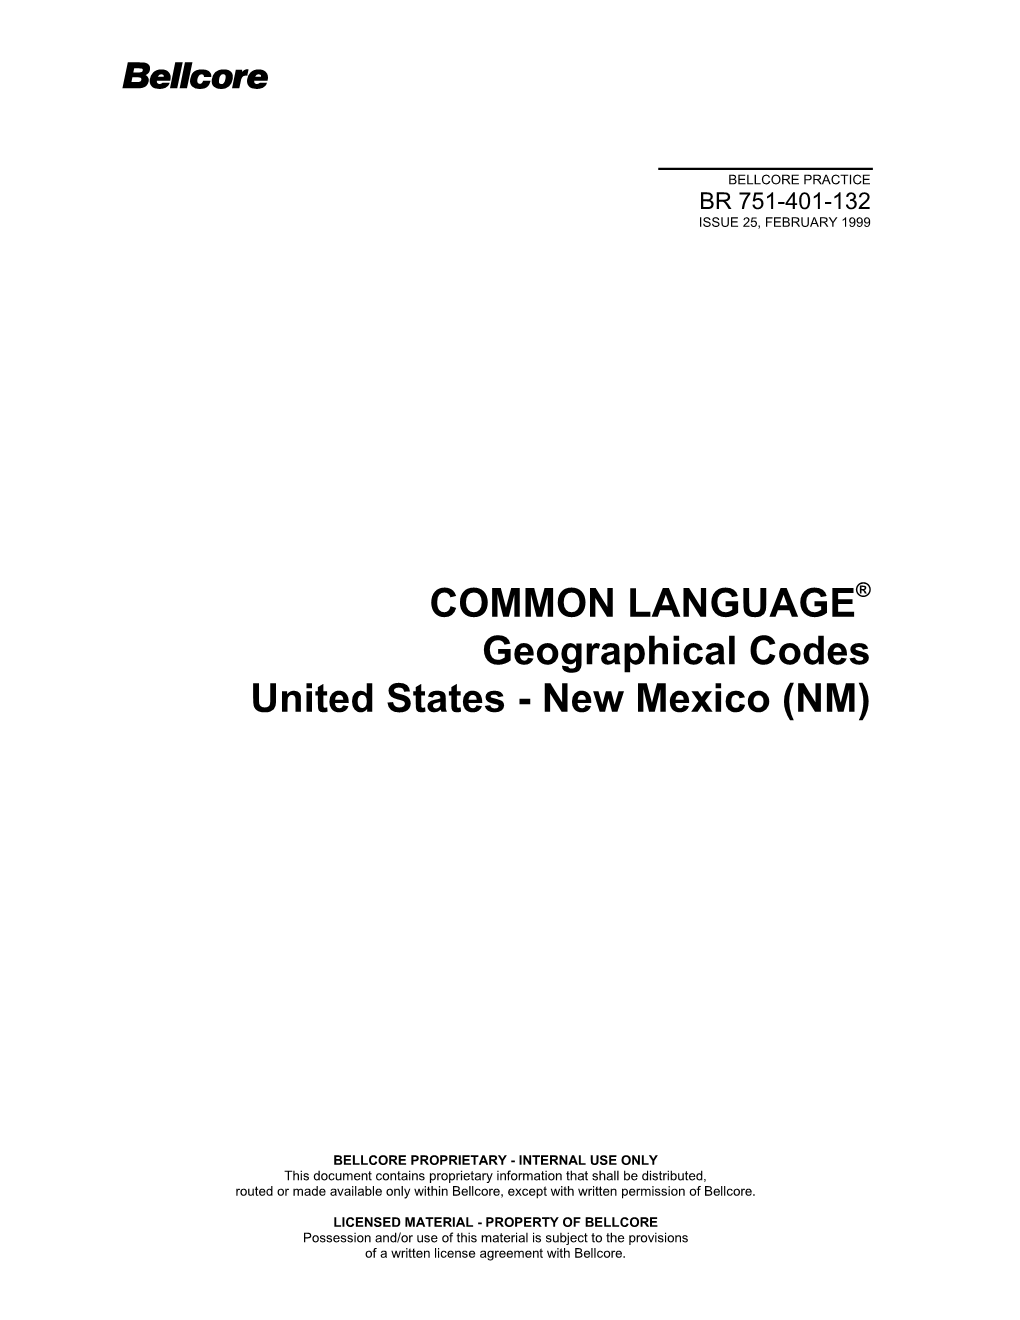 Common Language(R) Geographical Codes United States